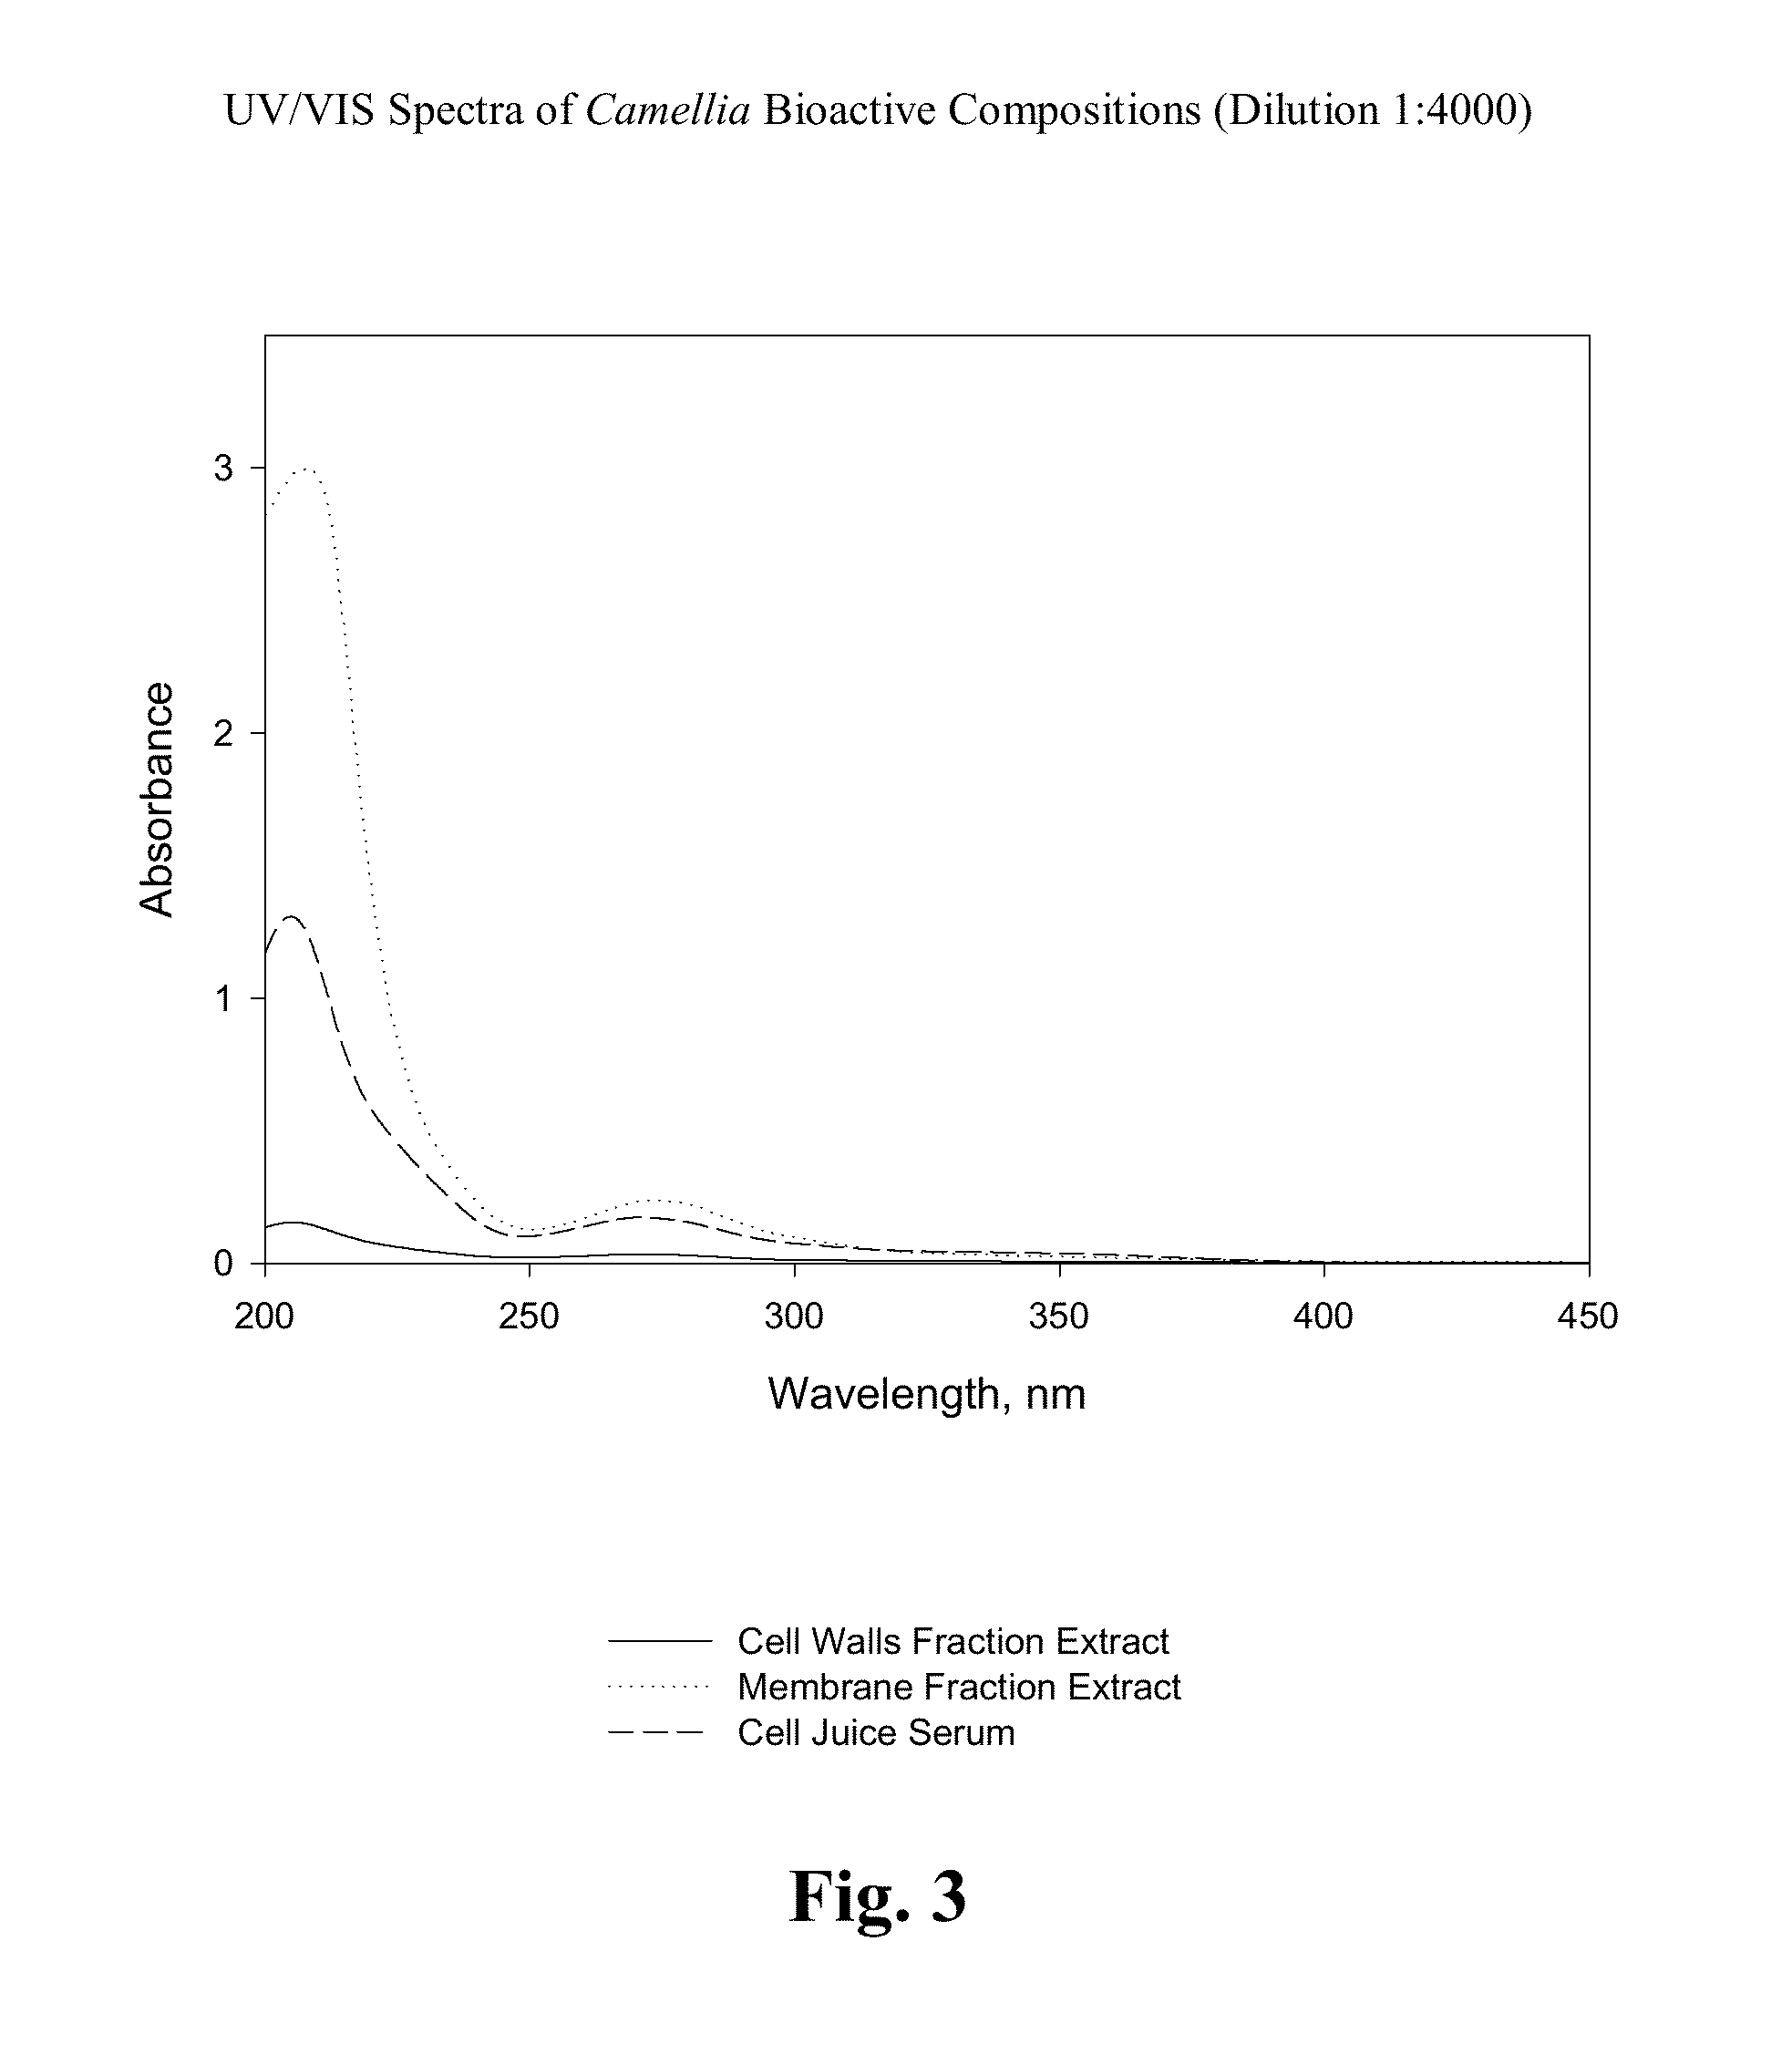 Bioactive compositions from theacea plants and use thereof in beverages, functional foods, nutriceuticals, supplements and the like